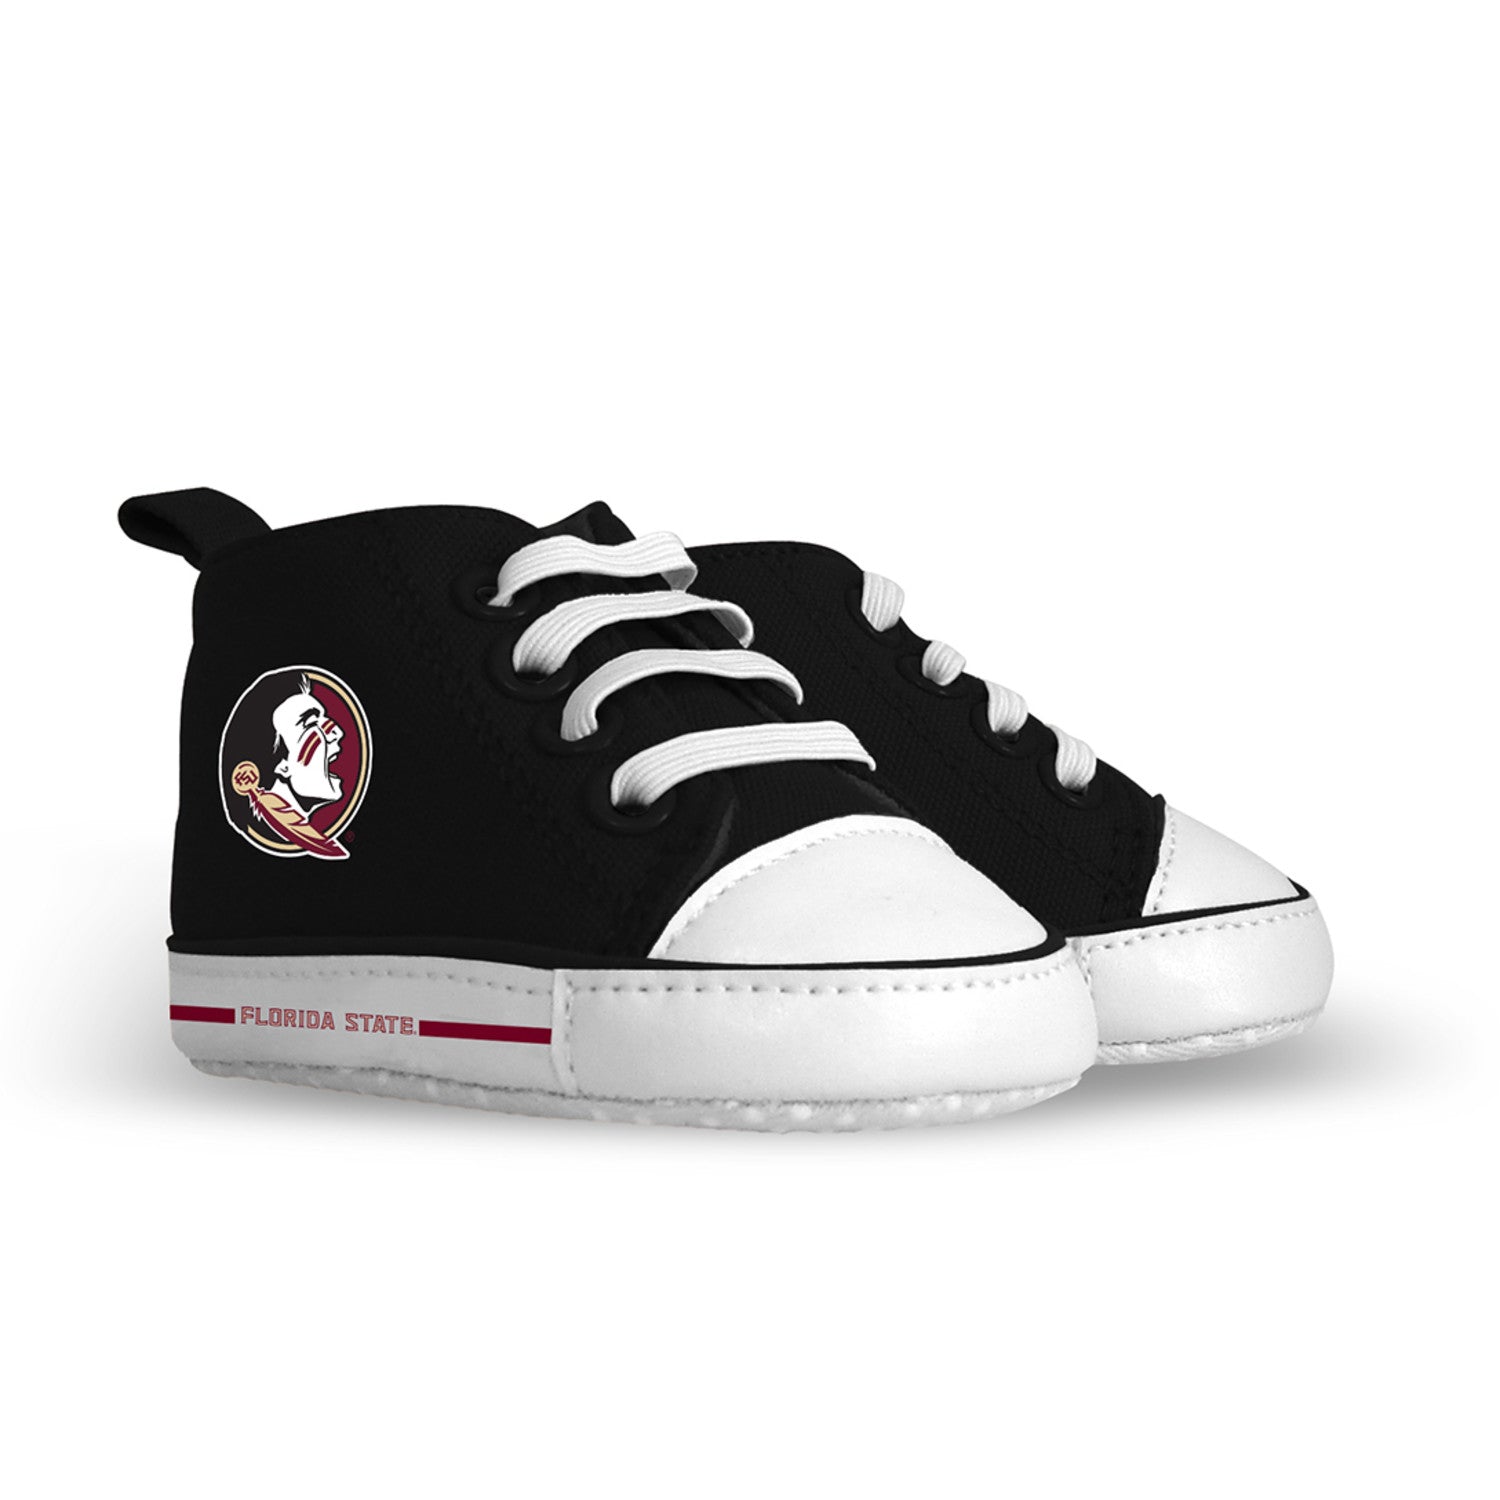 Florida State Seminoles Baby Shoes